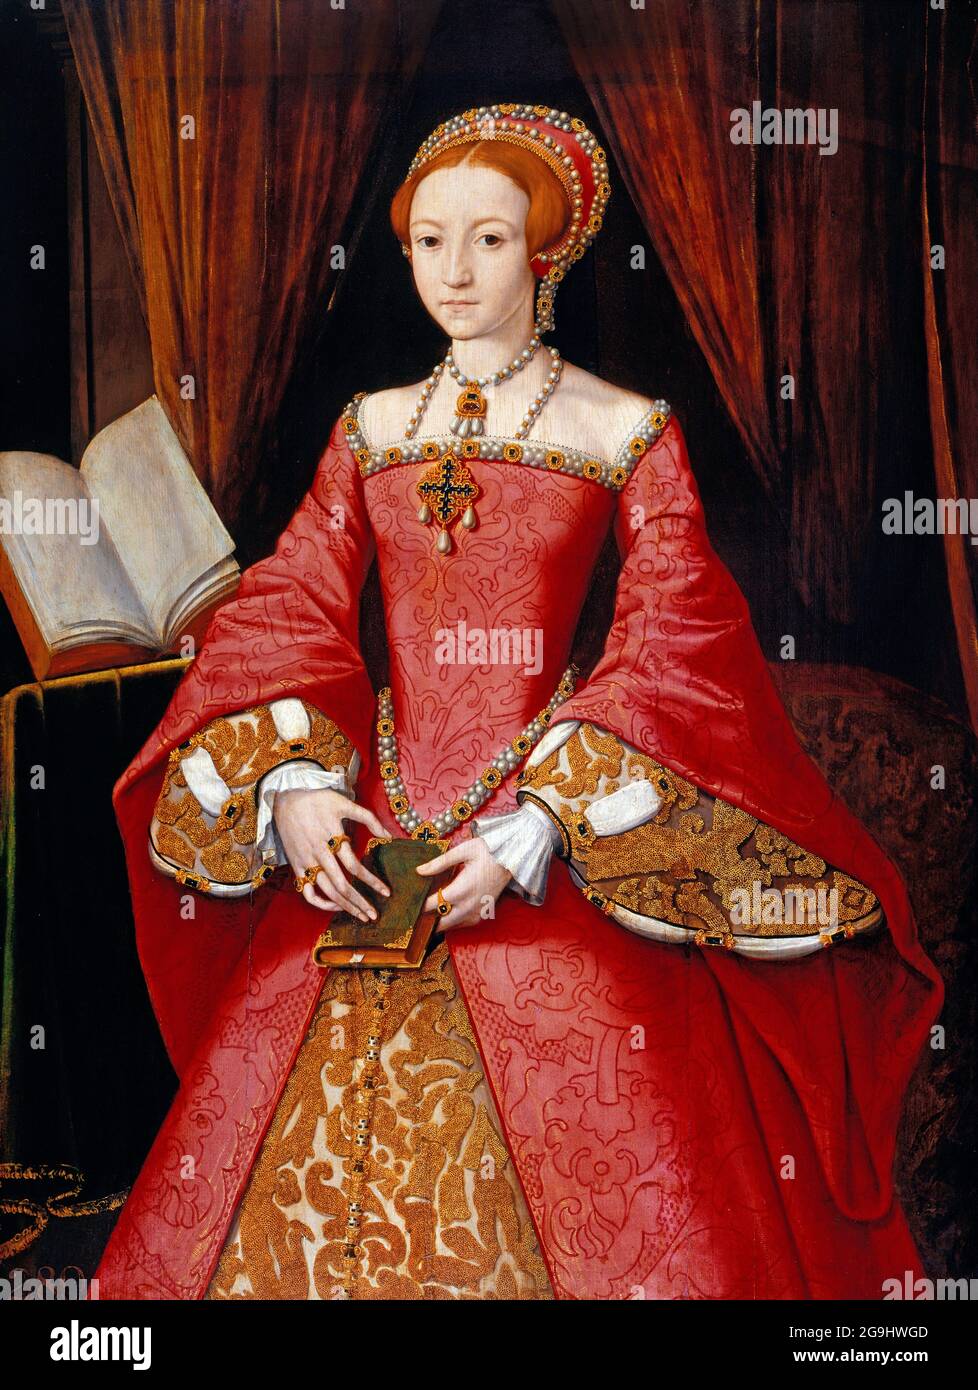 Elizabeth I. Portrait of the future Queen Elizabeth I (1533-1603) as Princess Elizabeth at the age of 12. Portrait by William Scrots, 1546/7 Stock Photo